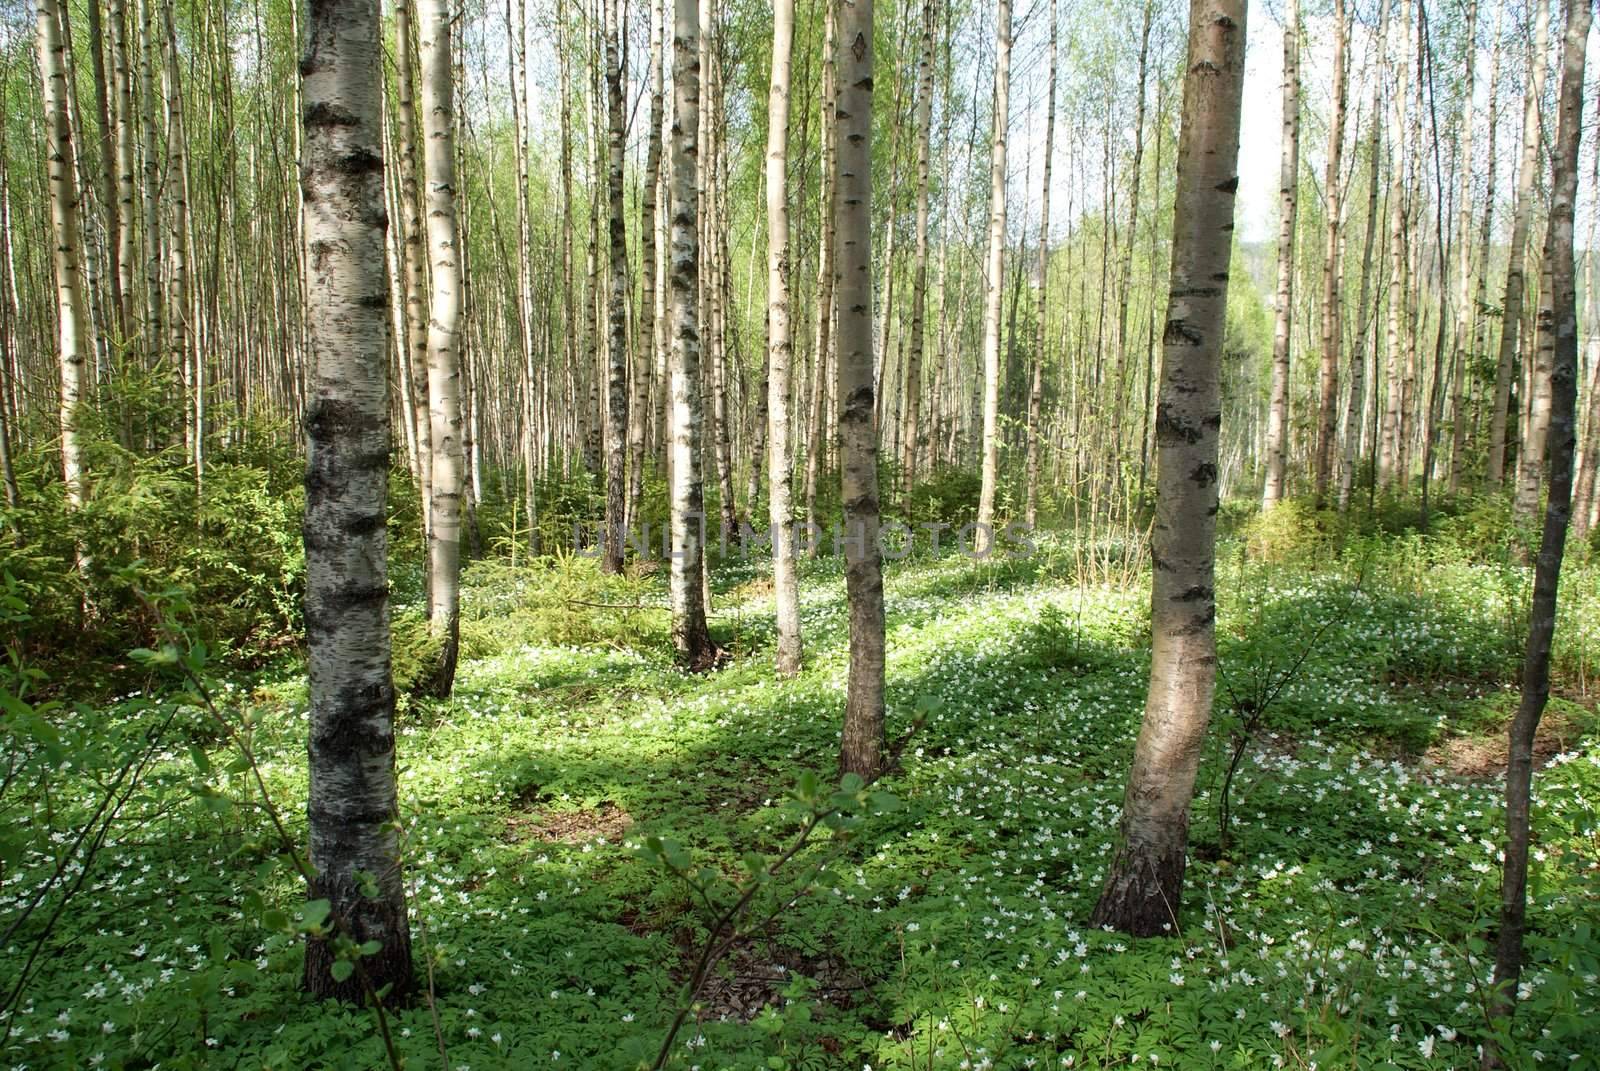 Sunlight in young birch tree forest with a lot of Anemone nemorosa (Windflower) flowers. Photographed in Salo, Finland in May 2010.